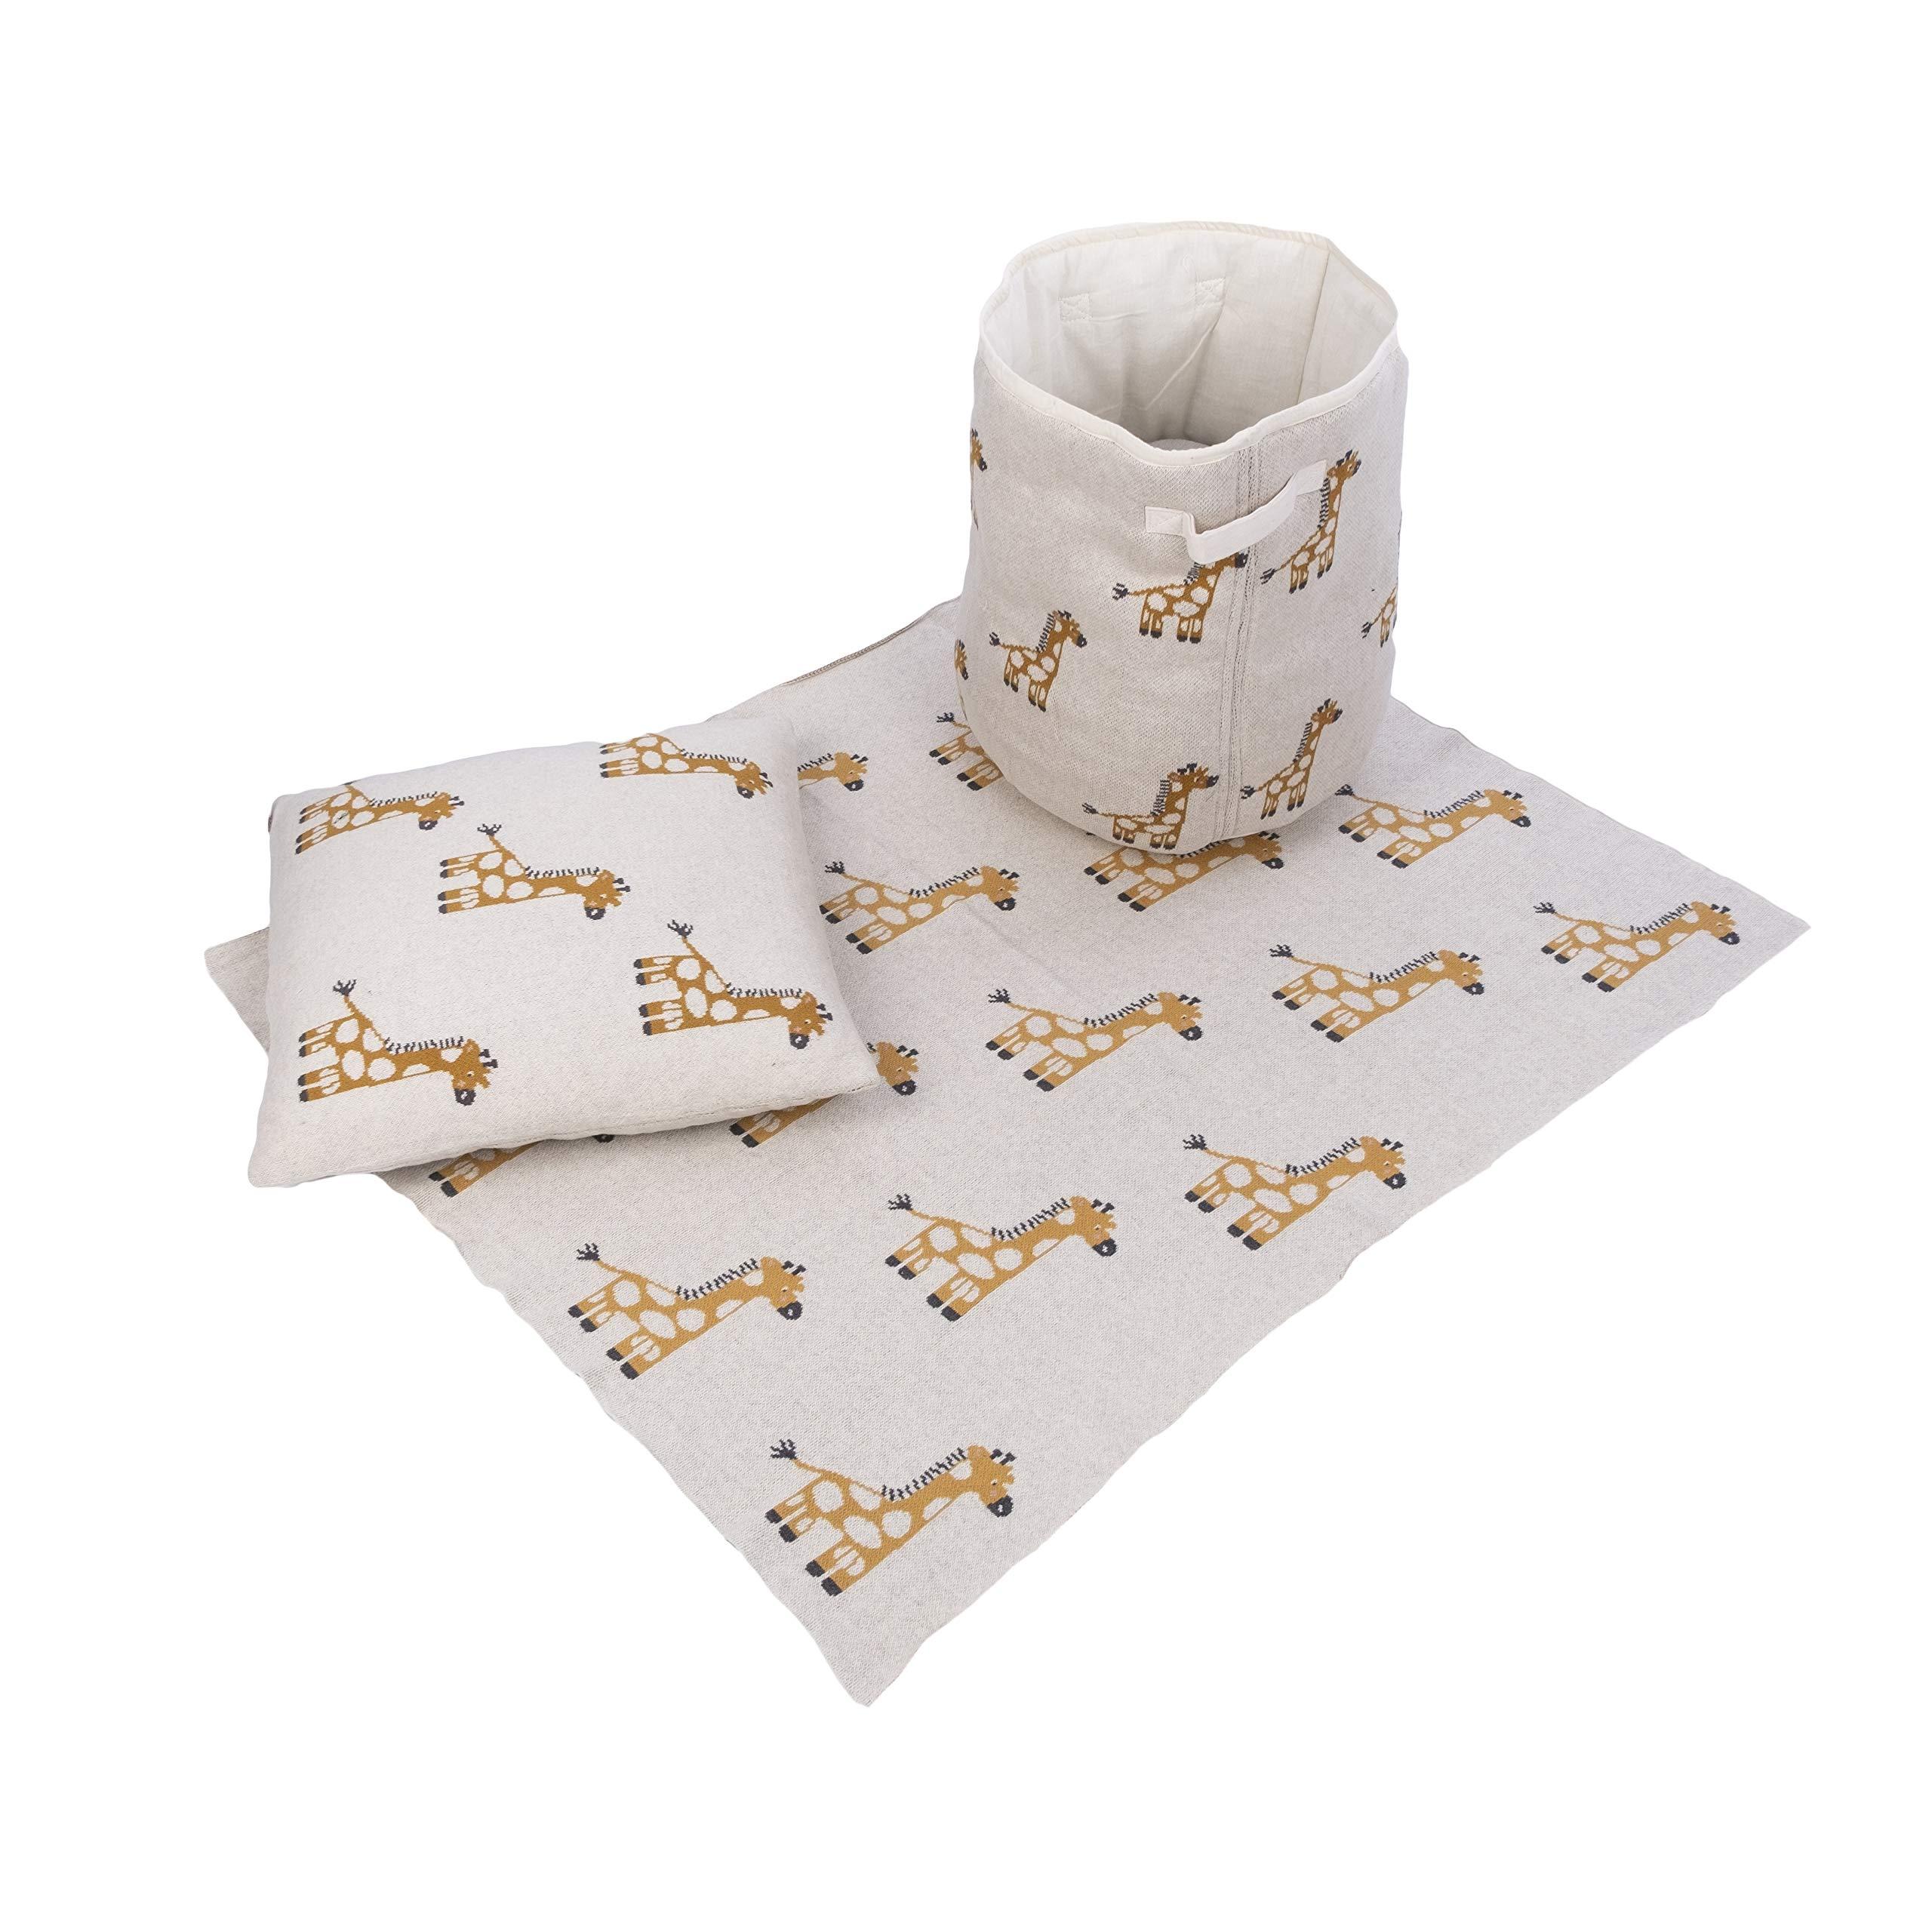 Penguin Home® Set of Knitted Basket, Cushion and Blanket - 100% Cotton in Giraffe Print - For Cosy Rooms - Foldable Basket 14"x16" (35x41cm) - Cushion 18"x18" (45x45cm) - Blanket 32"x40"(81x101cm)